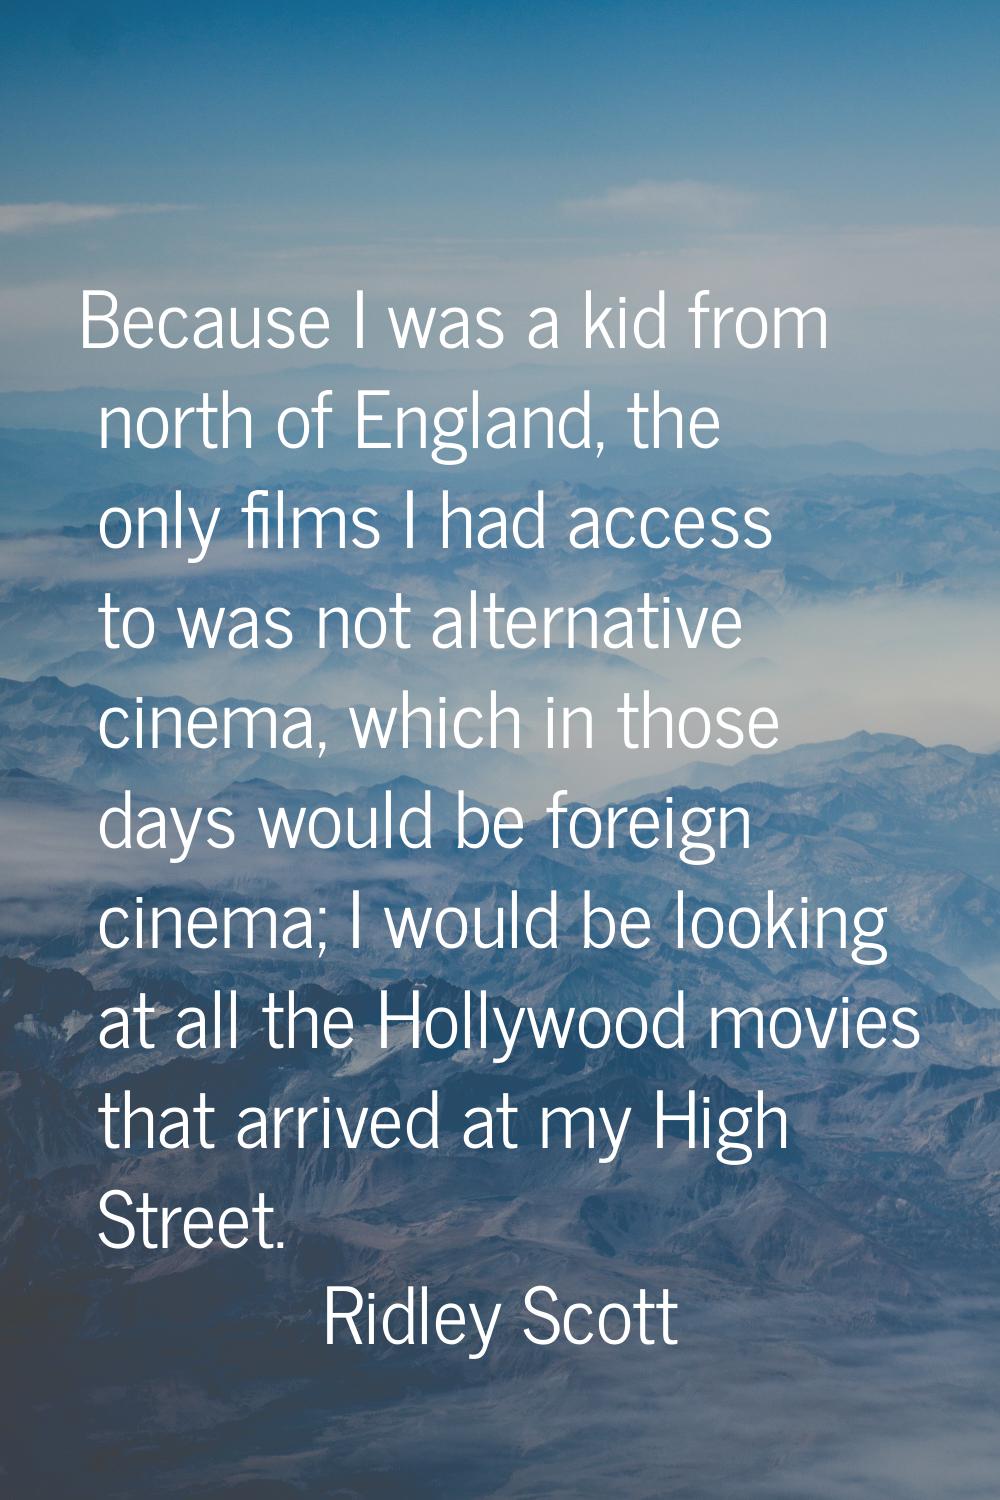 Because I was a kid from north of England, the only films I had access to was not alternative cinem